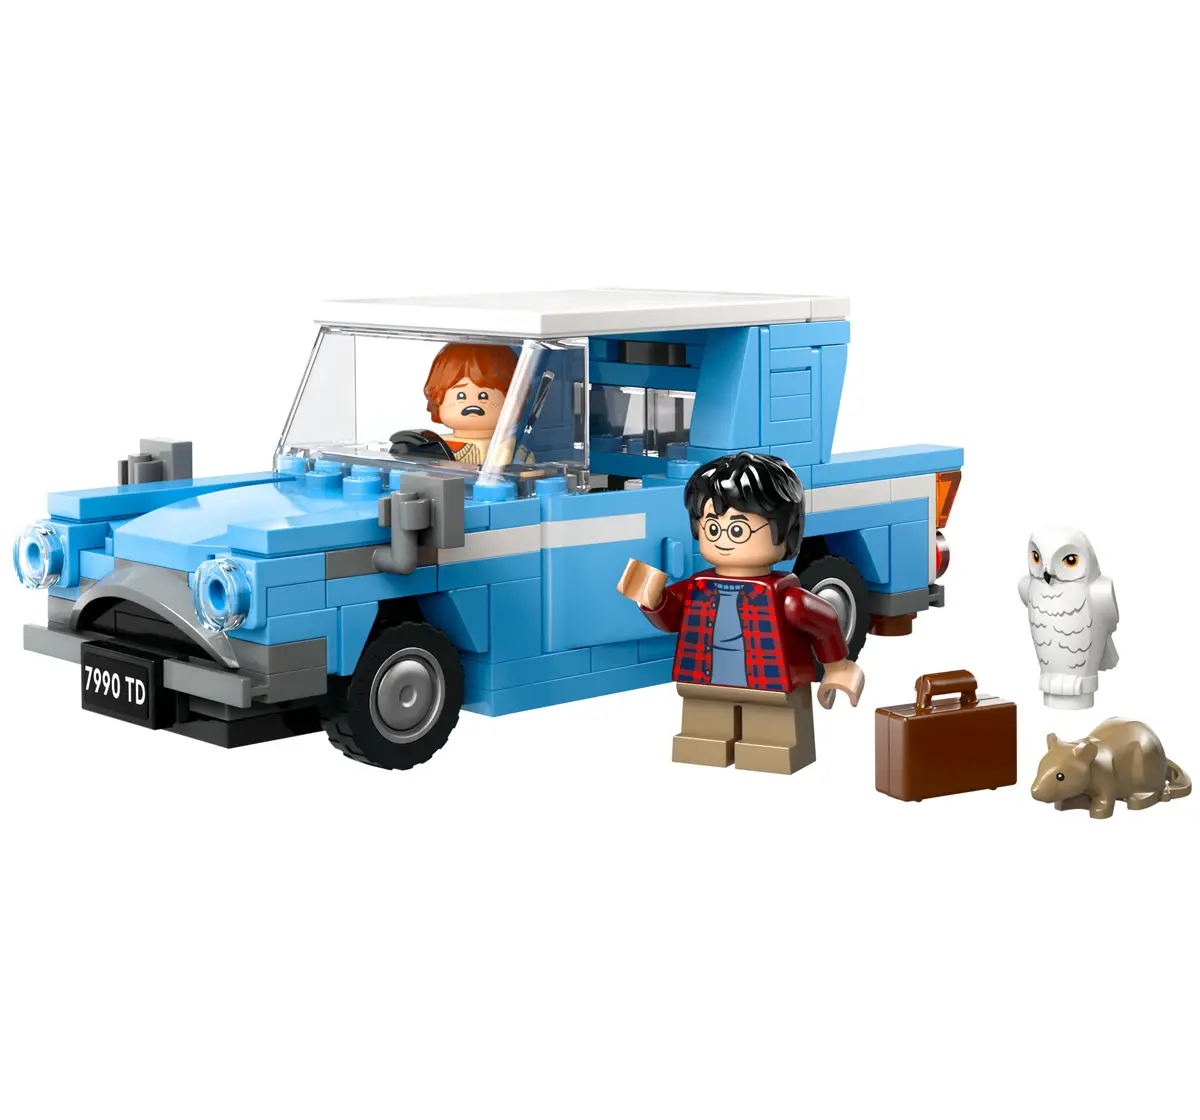 LEGO Harry Potter Flying Ford Anglia Car Toy 76424 (1212 Pieces)